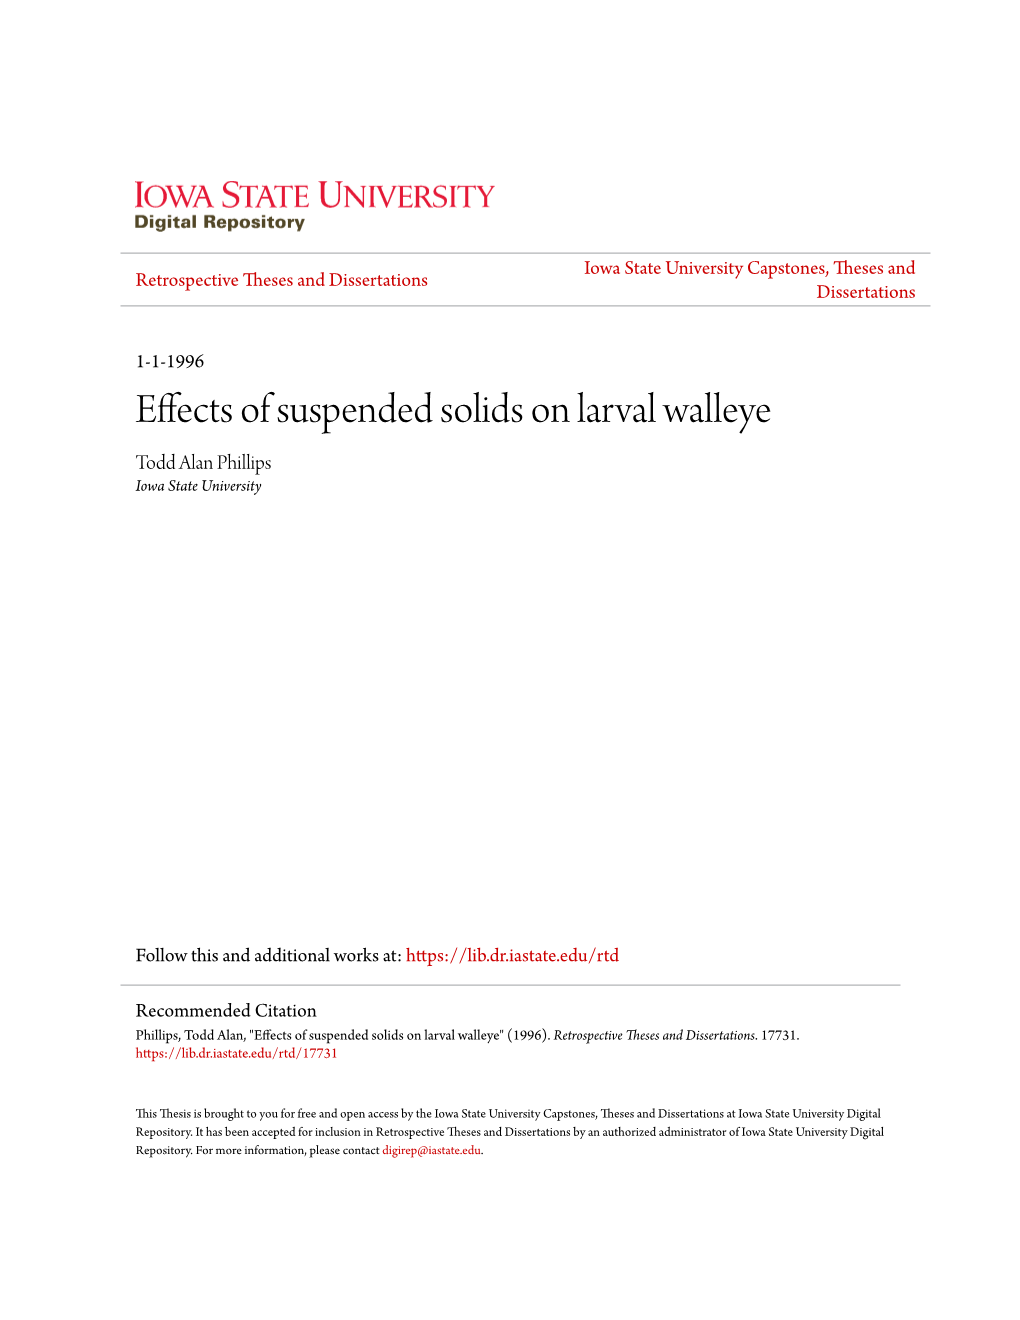 Effects of Suspended Solids on Larval Walleye Todd Alan Phillips Iowa State University